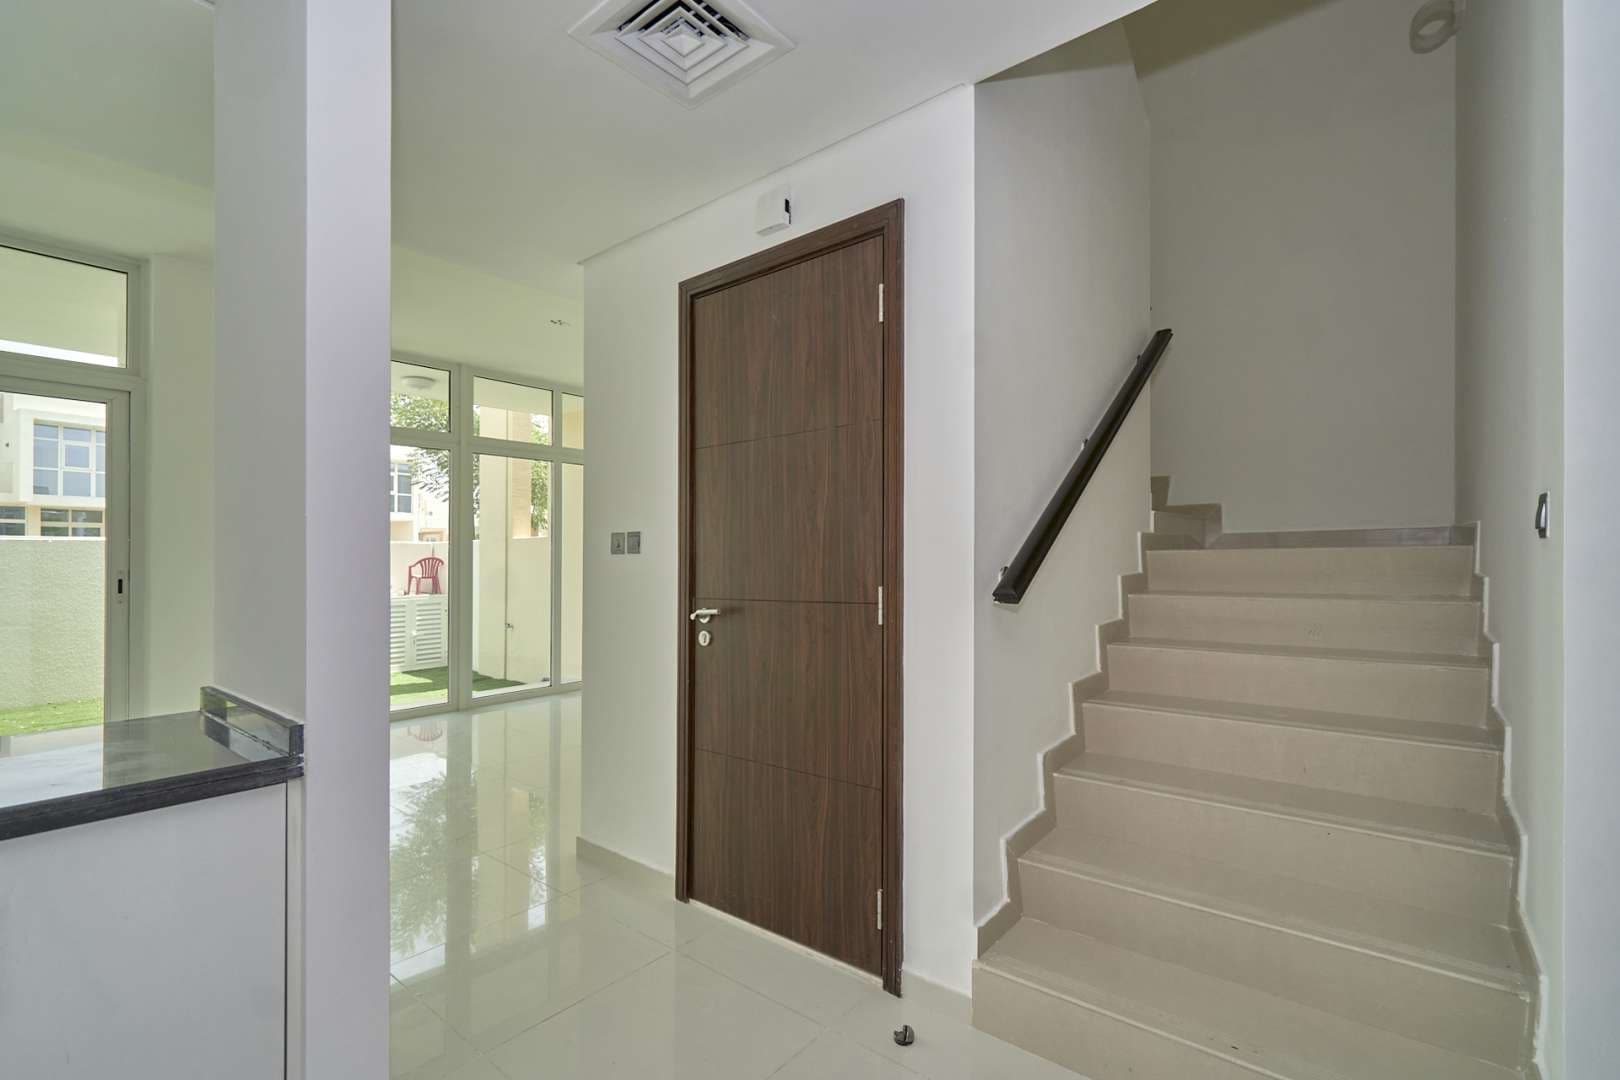 3 Bedroom Townhouse For Rent Amazonia Lp08419 14caacca8c419800.jpg